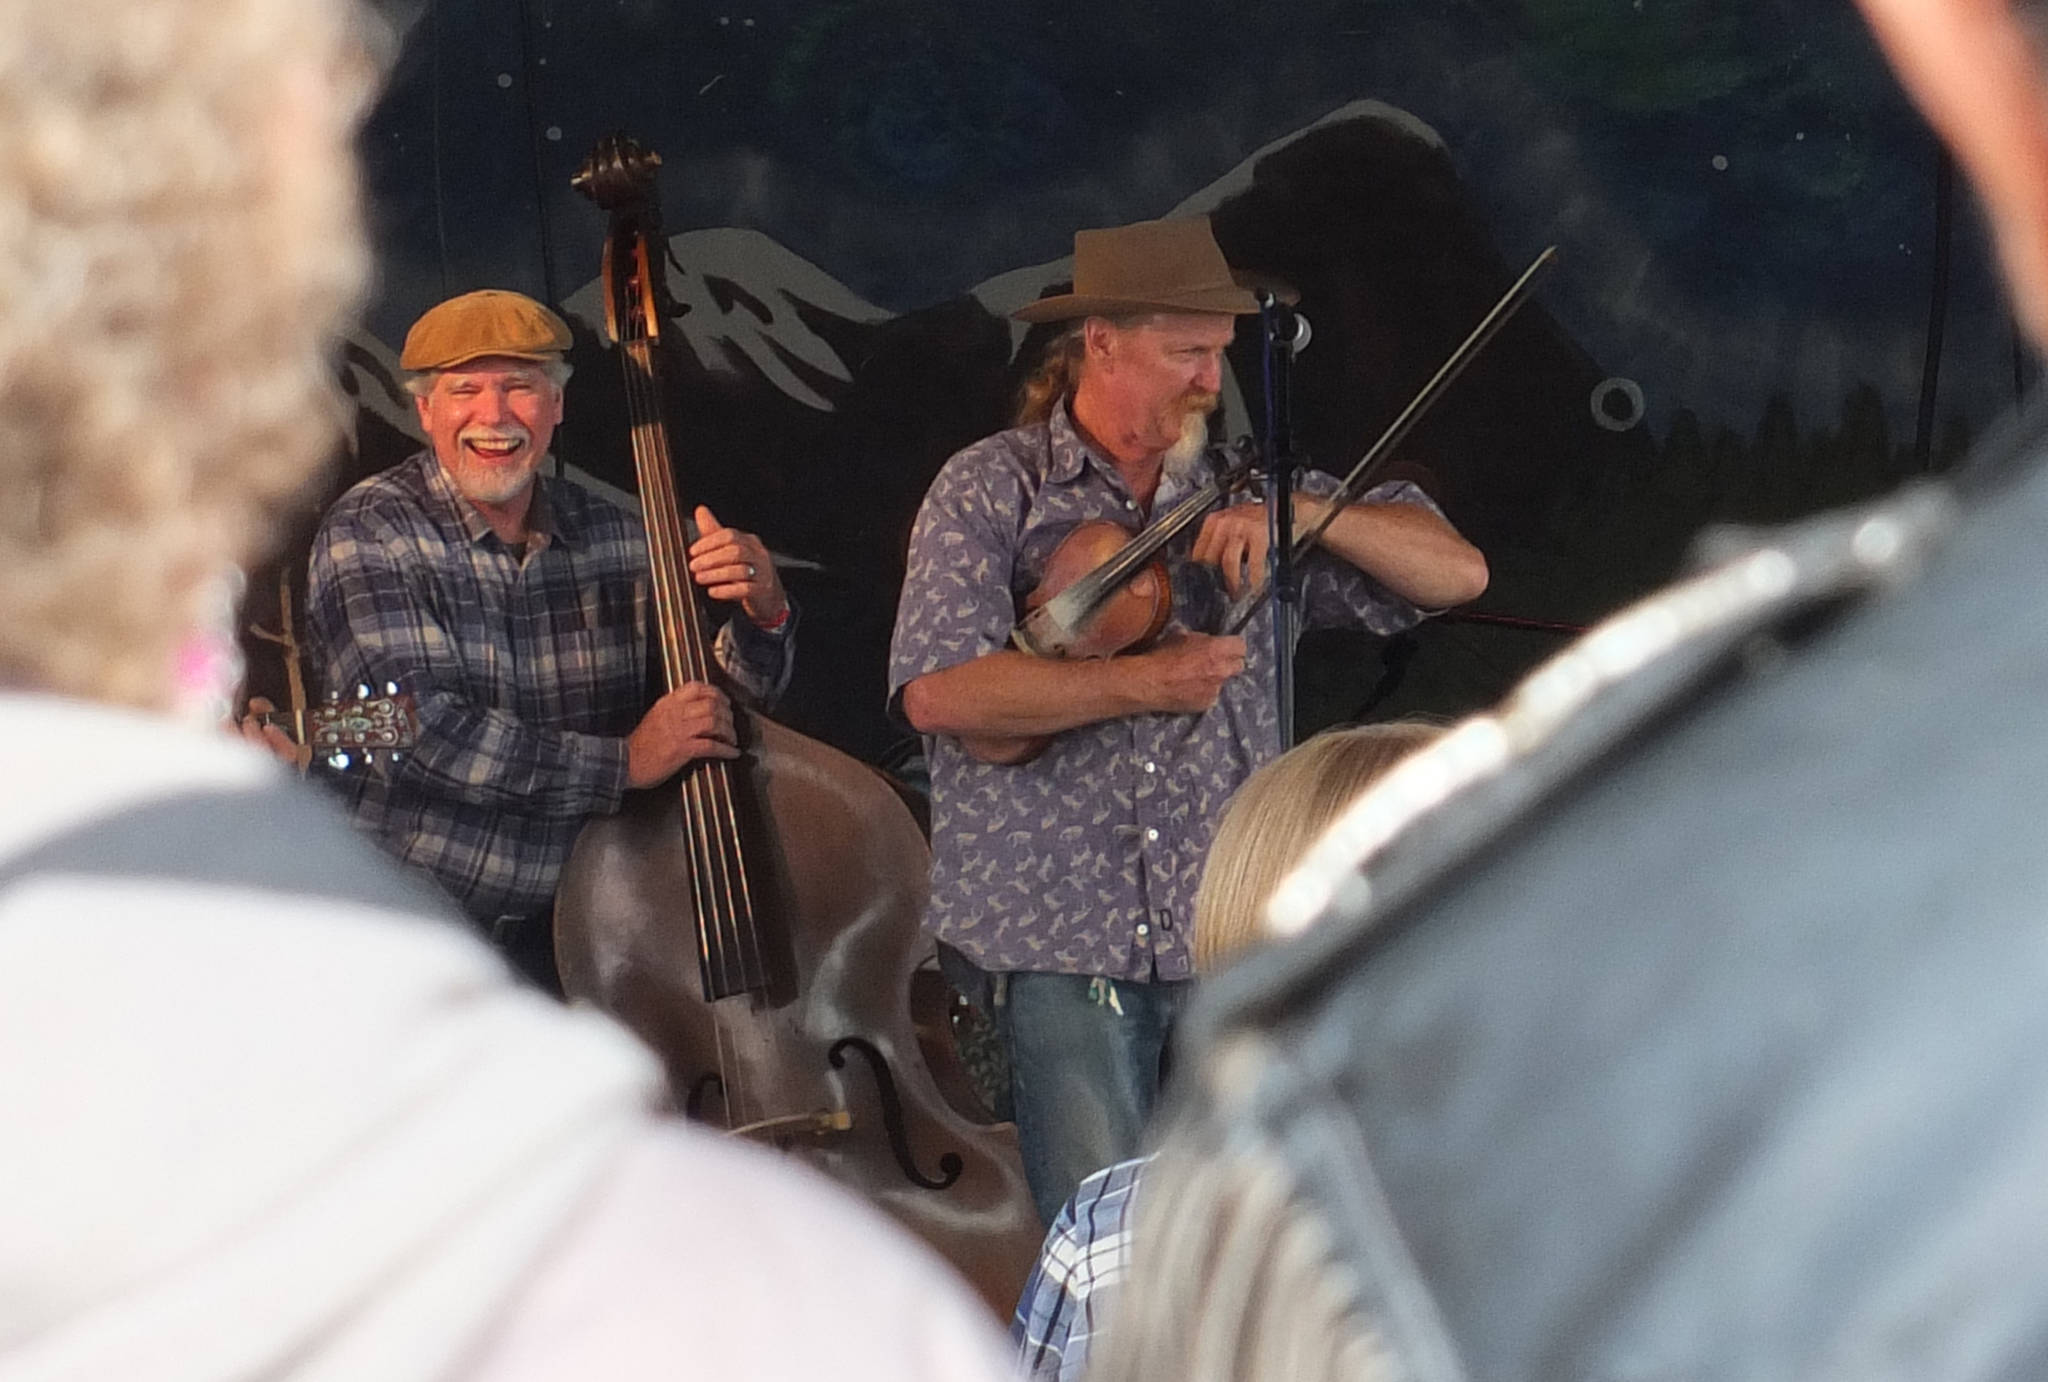 Audience members watch The Fishpickers joke on stage during their performance Saturday, Aug. 1, 2015 at the 47th annual Southeast Alaska State Fair in Haines. (Juneau Empire file)